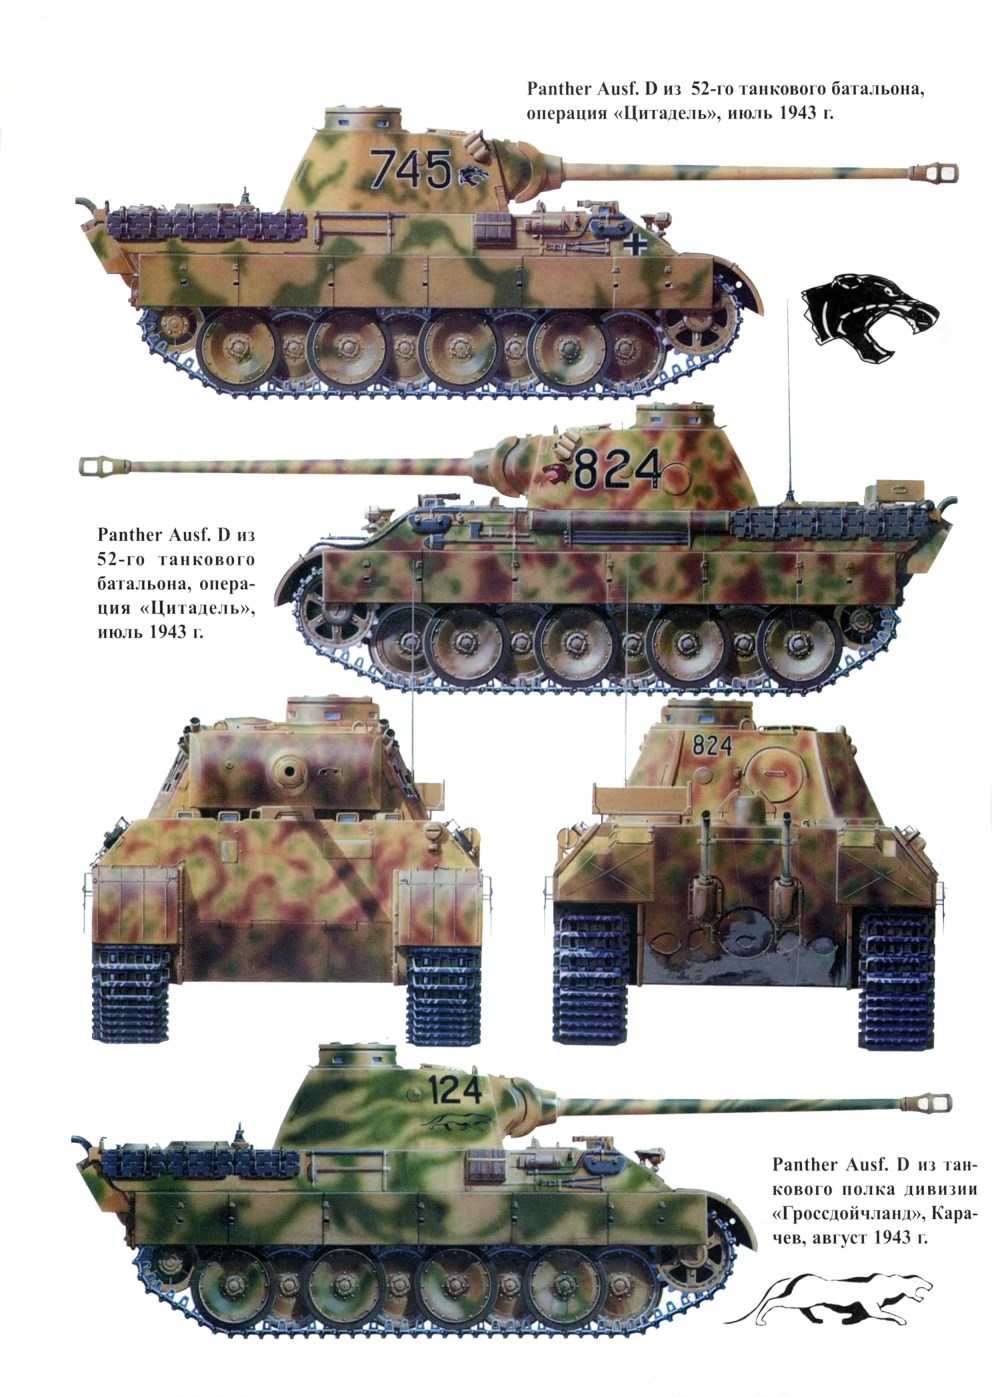 1706493693 495 Pz Kw V Panther Ausf D Sd Kfz 171